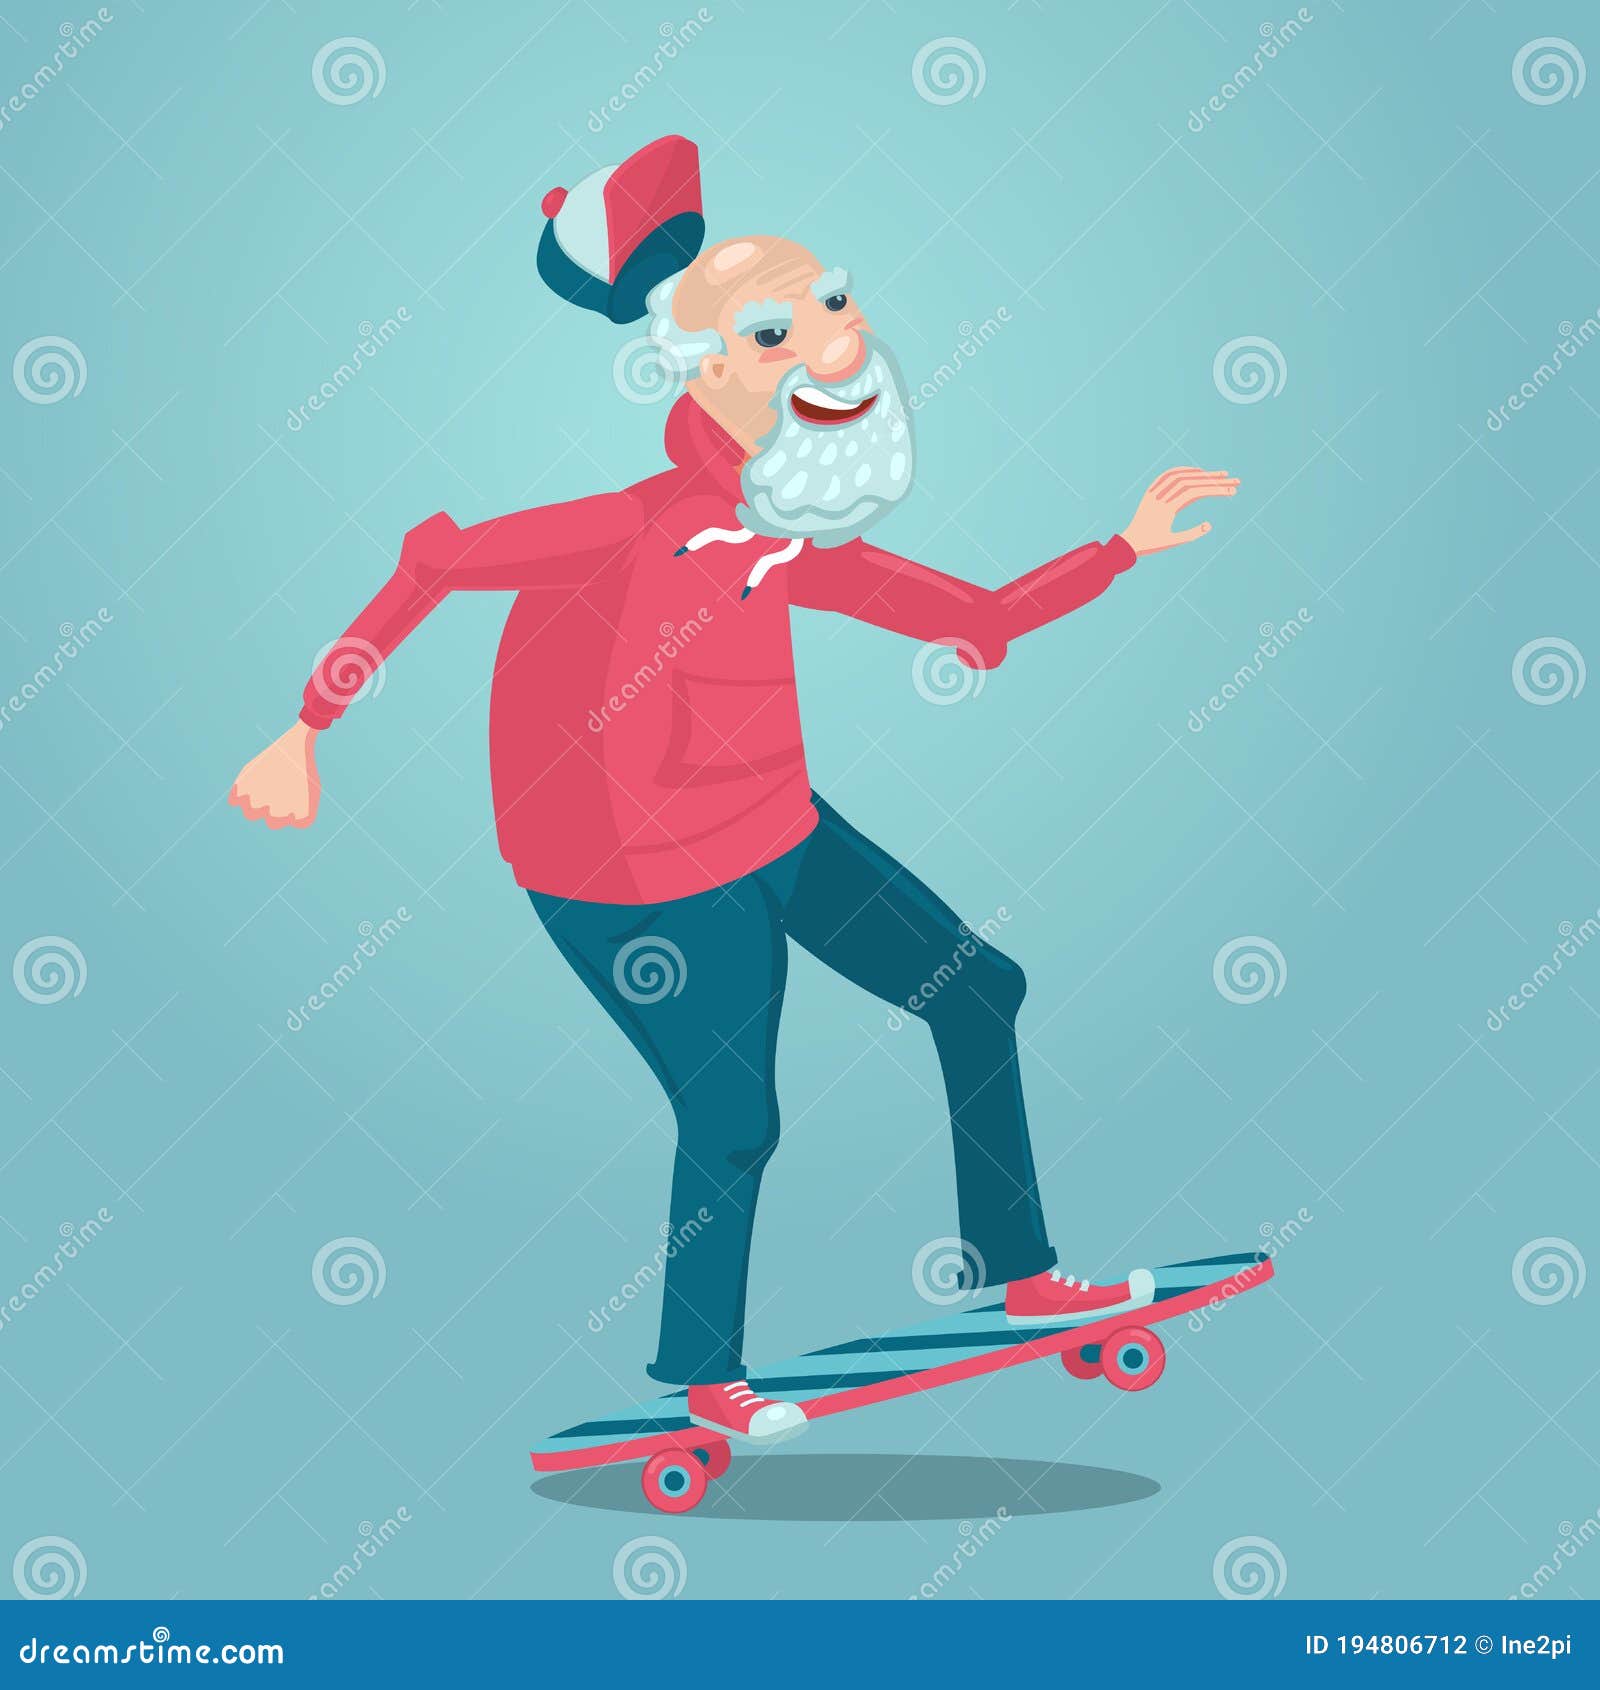 Grandpa on a Skate. Old Man is Skating. Cartoon Character Design. Adult ...